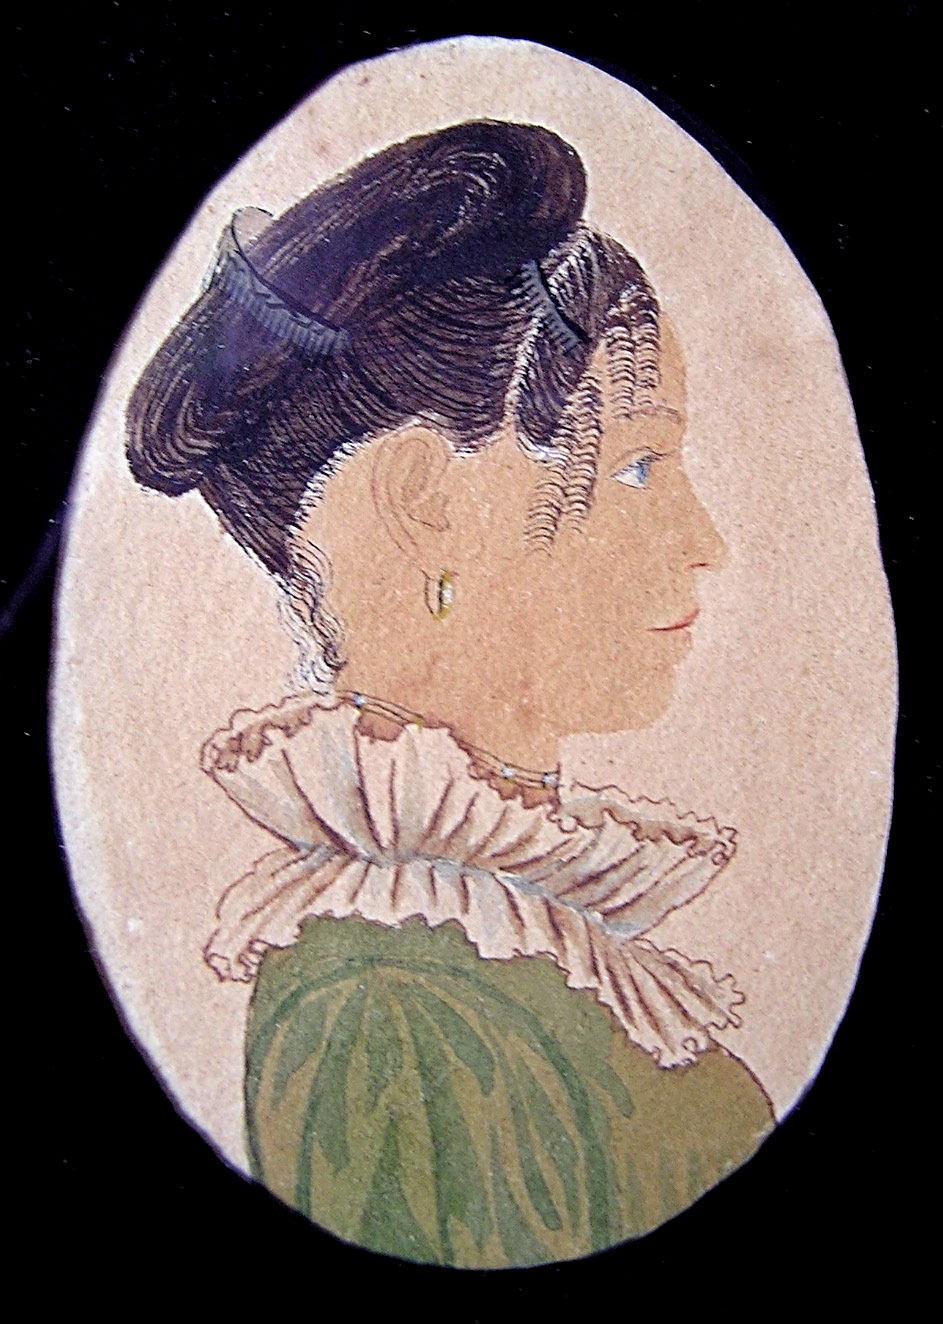 Attributed to Rufus Porter, Betsey Long, ca. 1815-1817